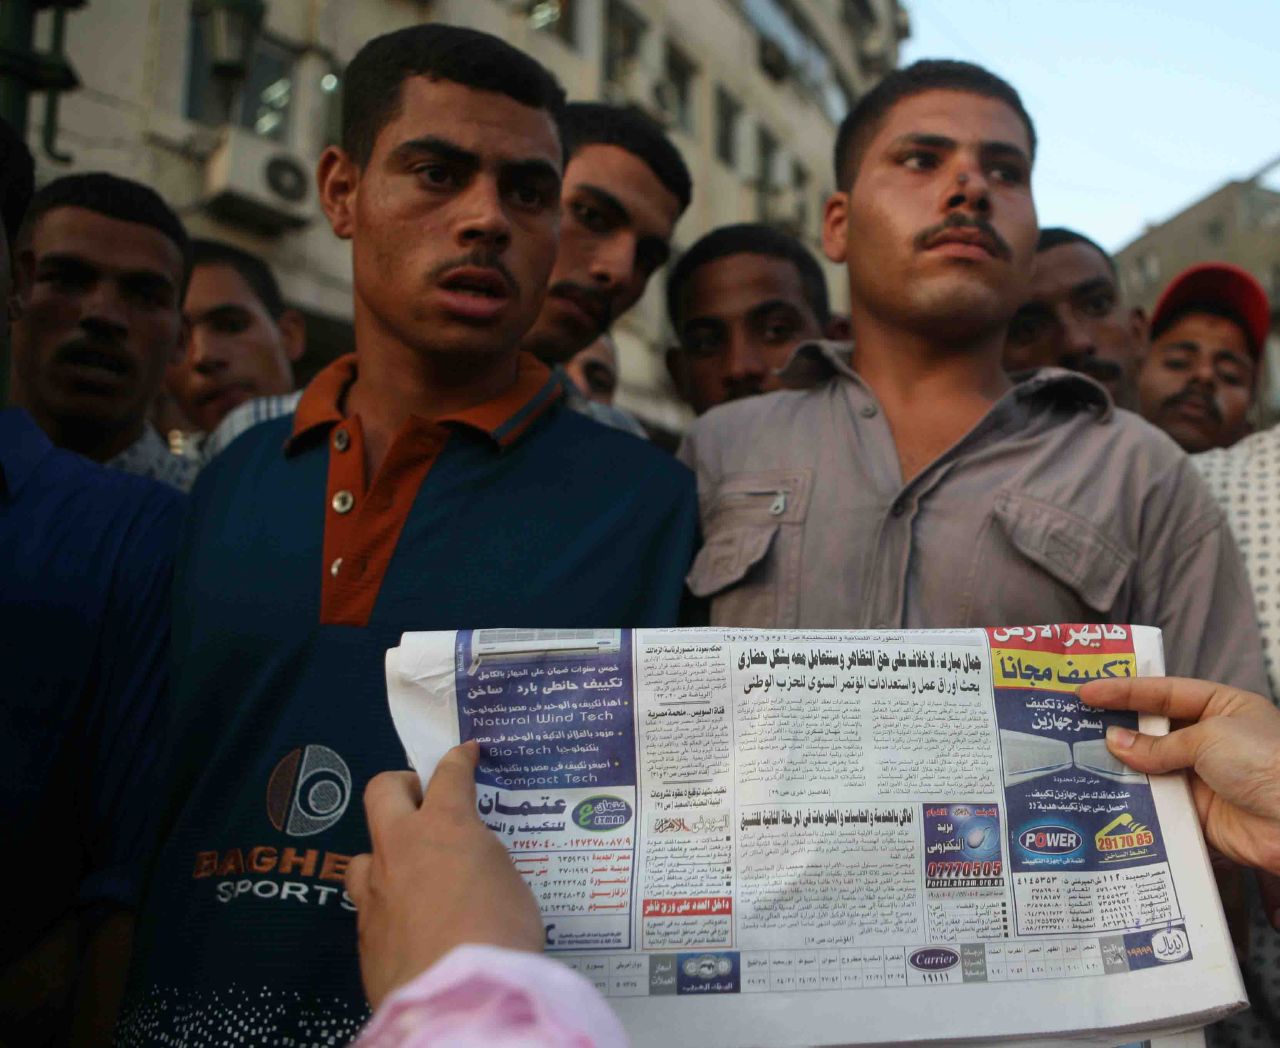 A demonstrator holding Al-Ahram newspaper issue in front of the security-deployed thugs (Photo by Amr Abdallah, 26 July 2006)